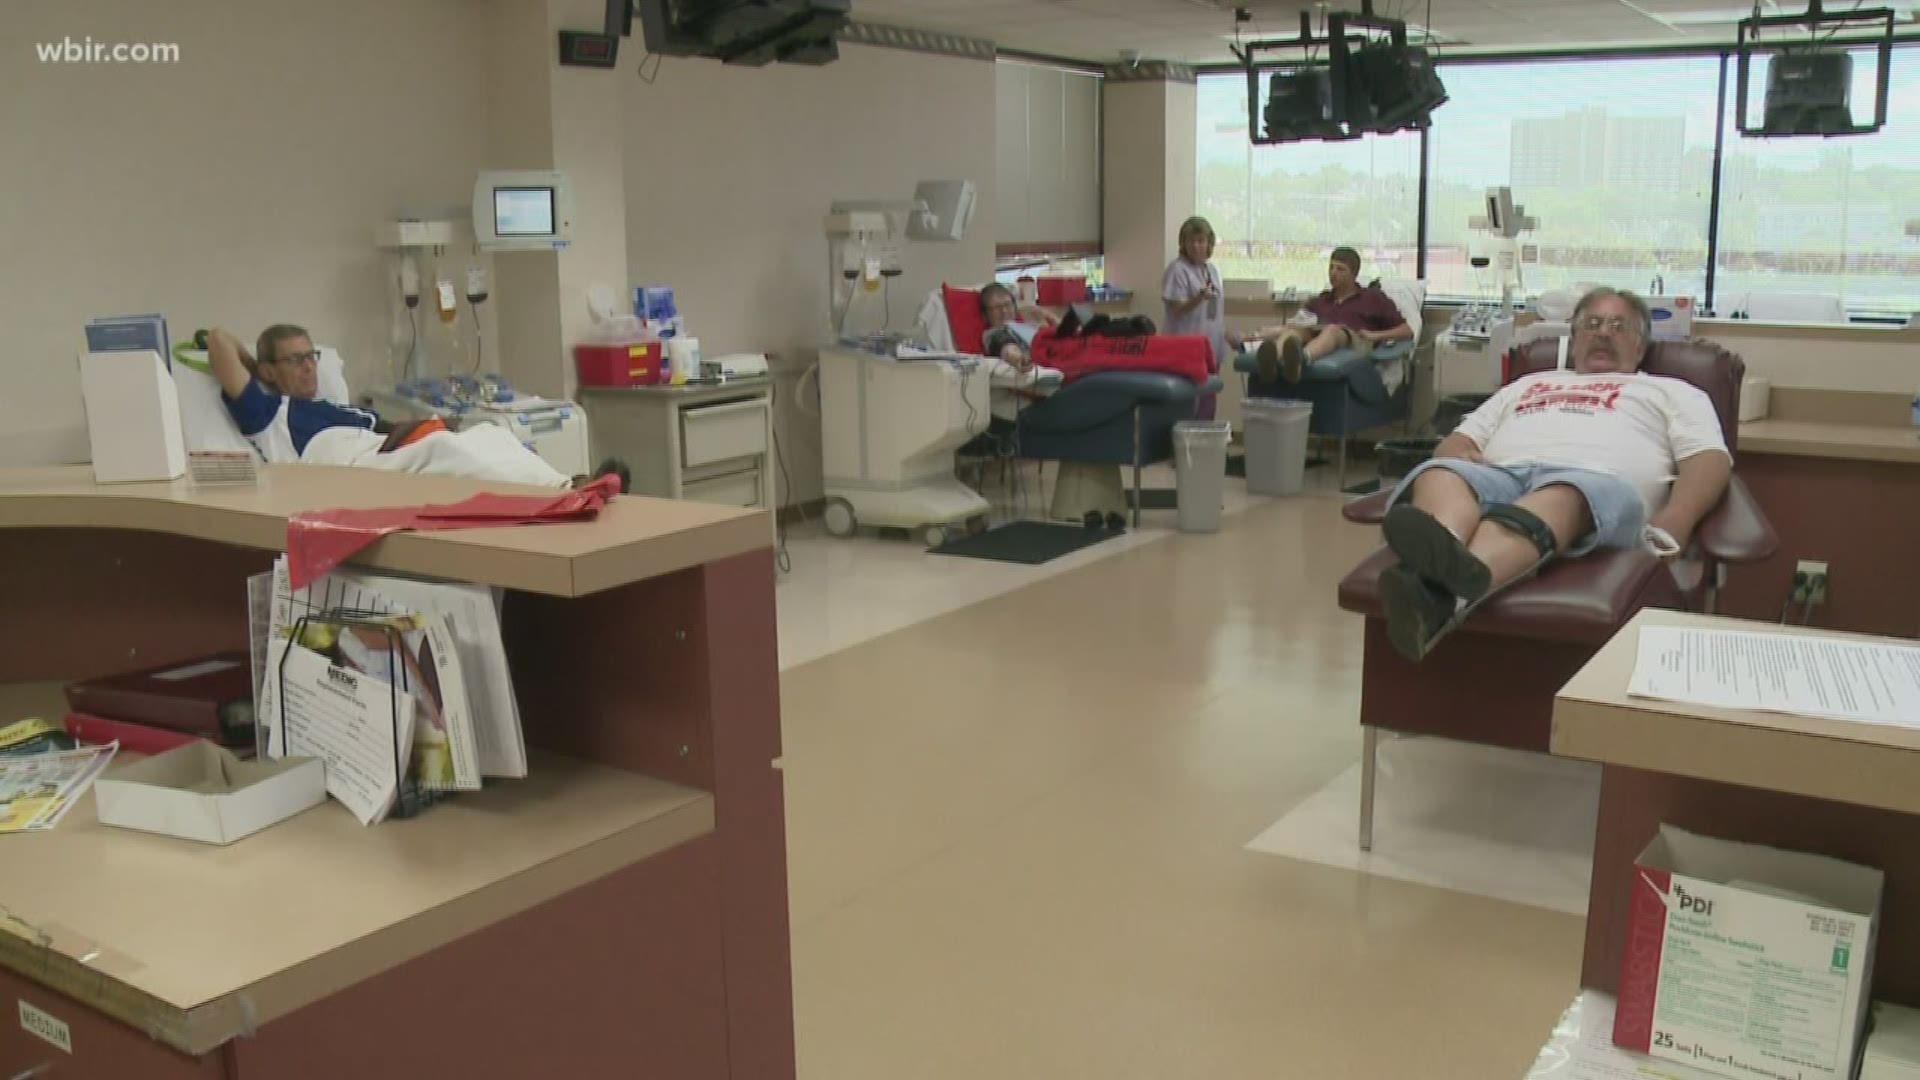 MEDIC Regional Blood Centers said they are in critical need for O Positive and O Negative blood types.